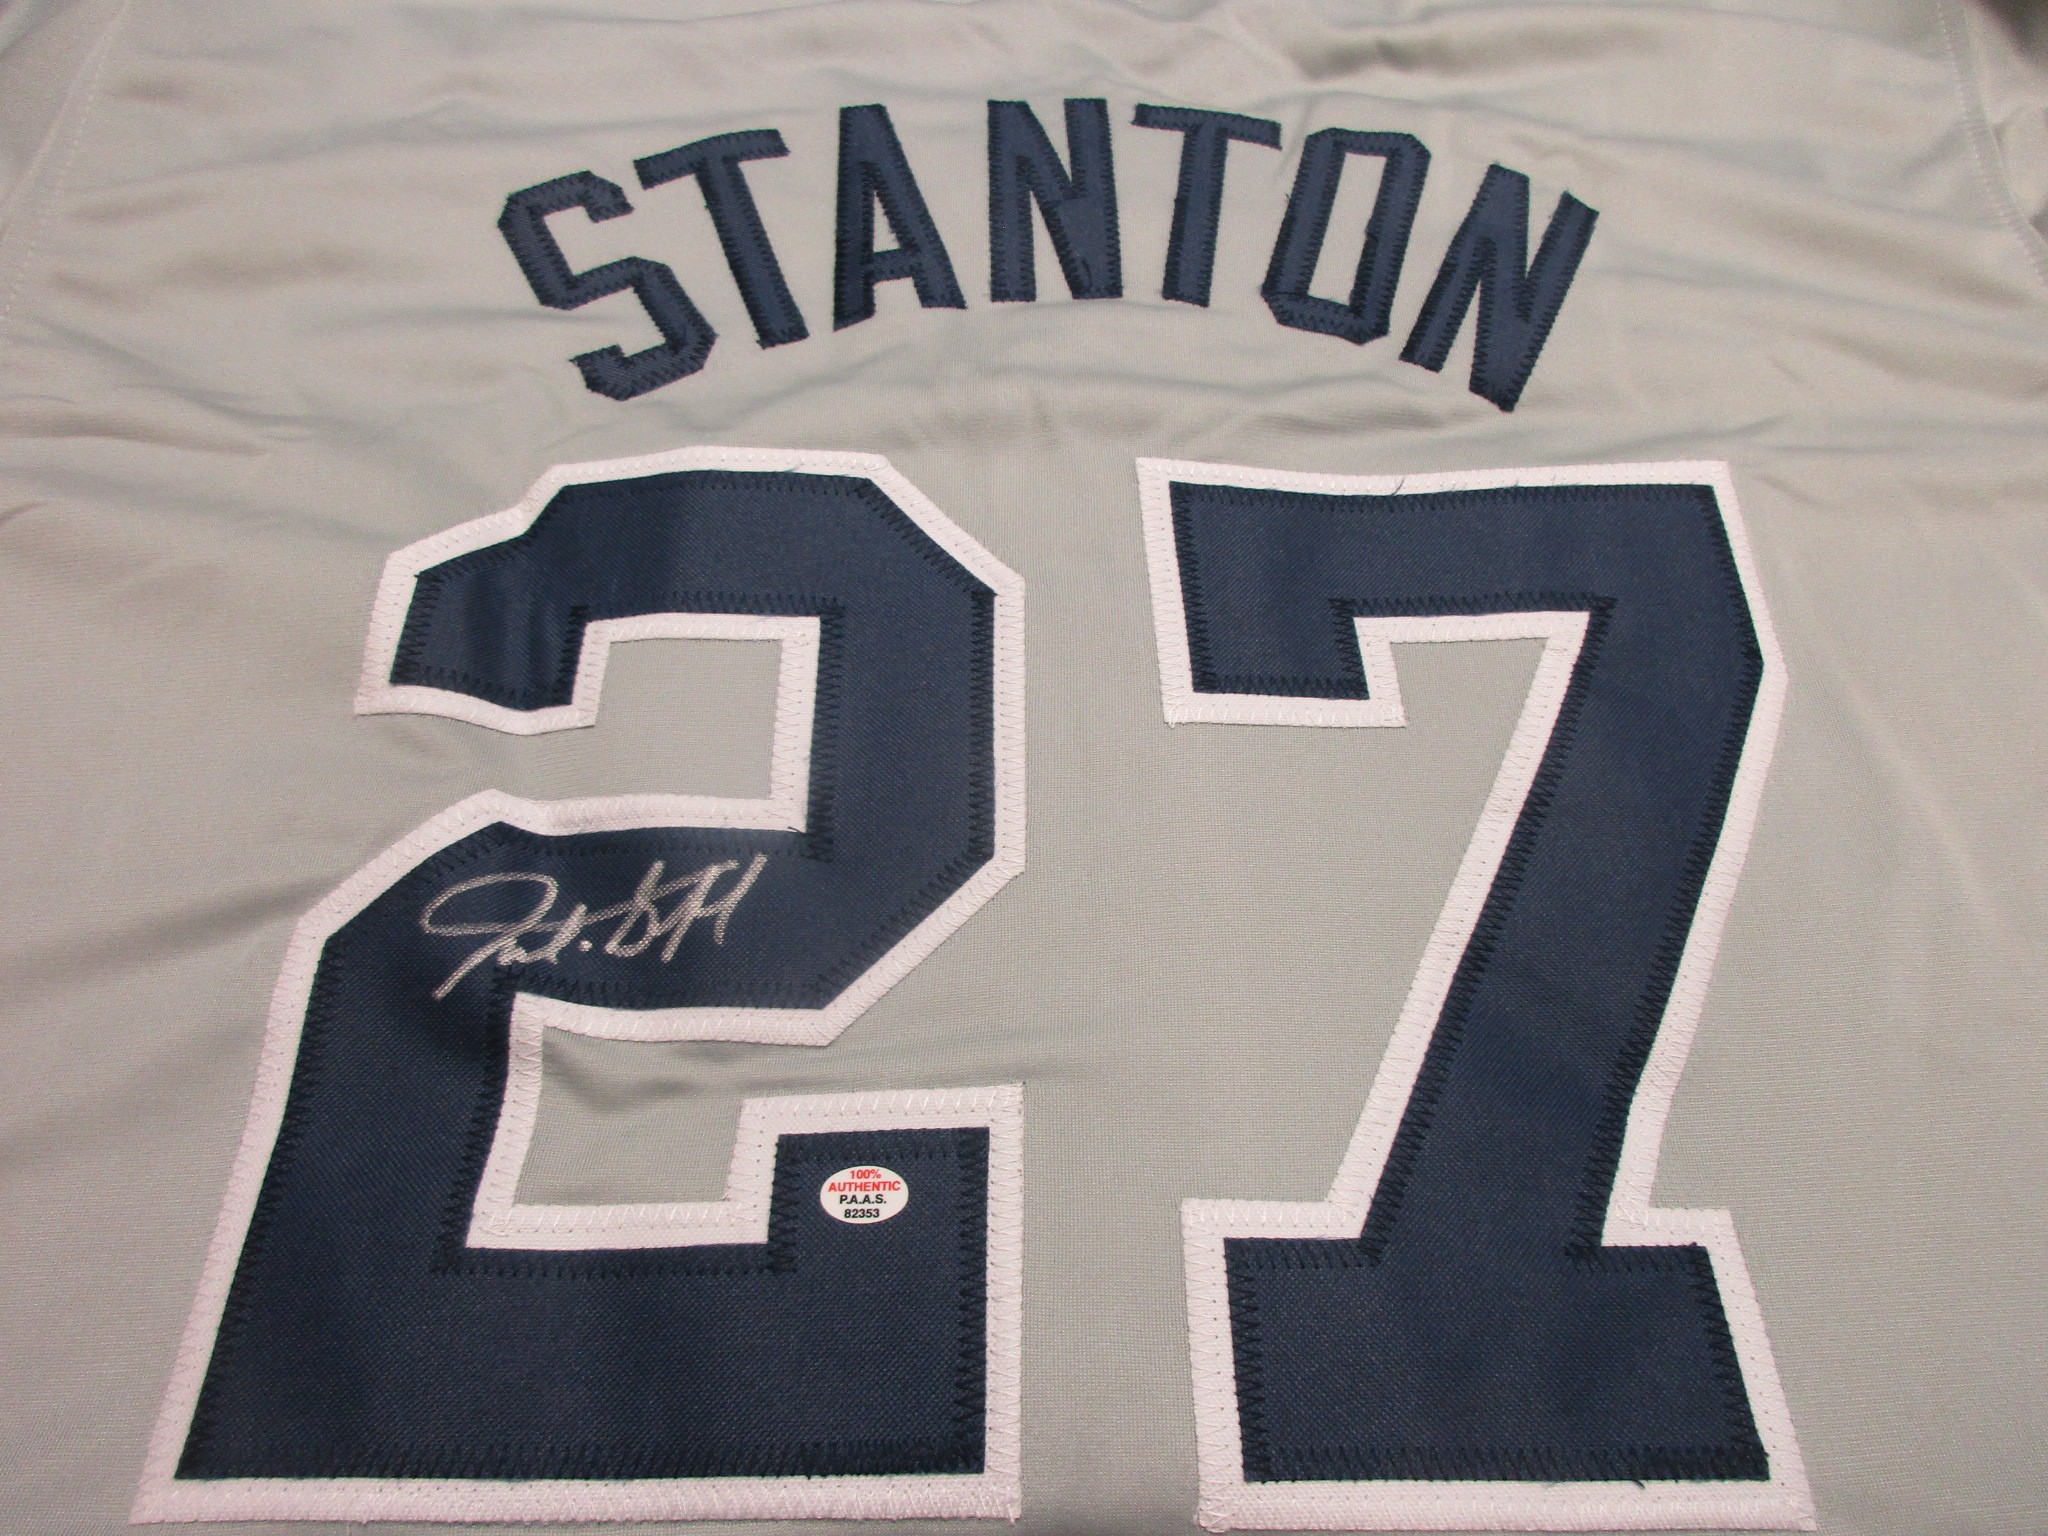 Giancarlo Stanton of the NY Yankees signed